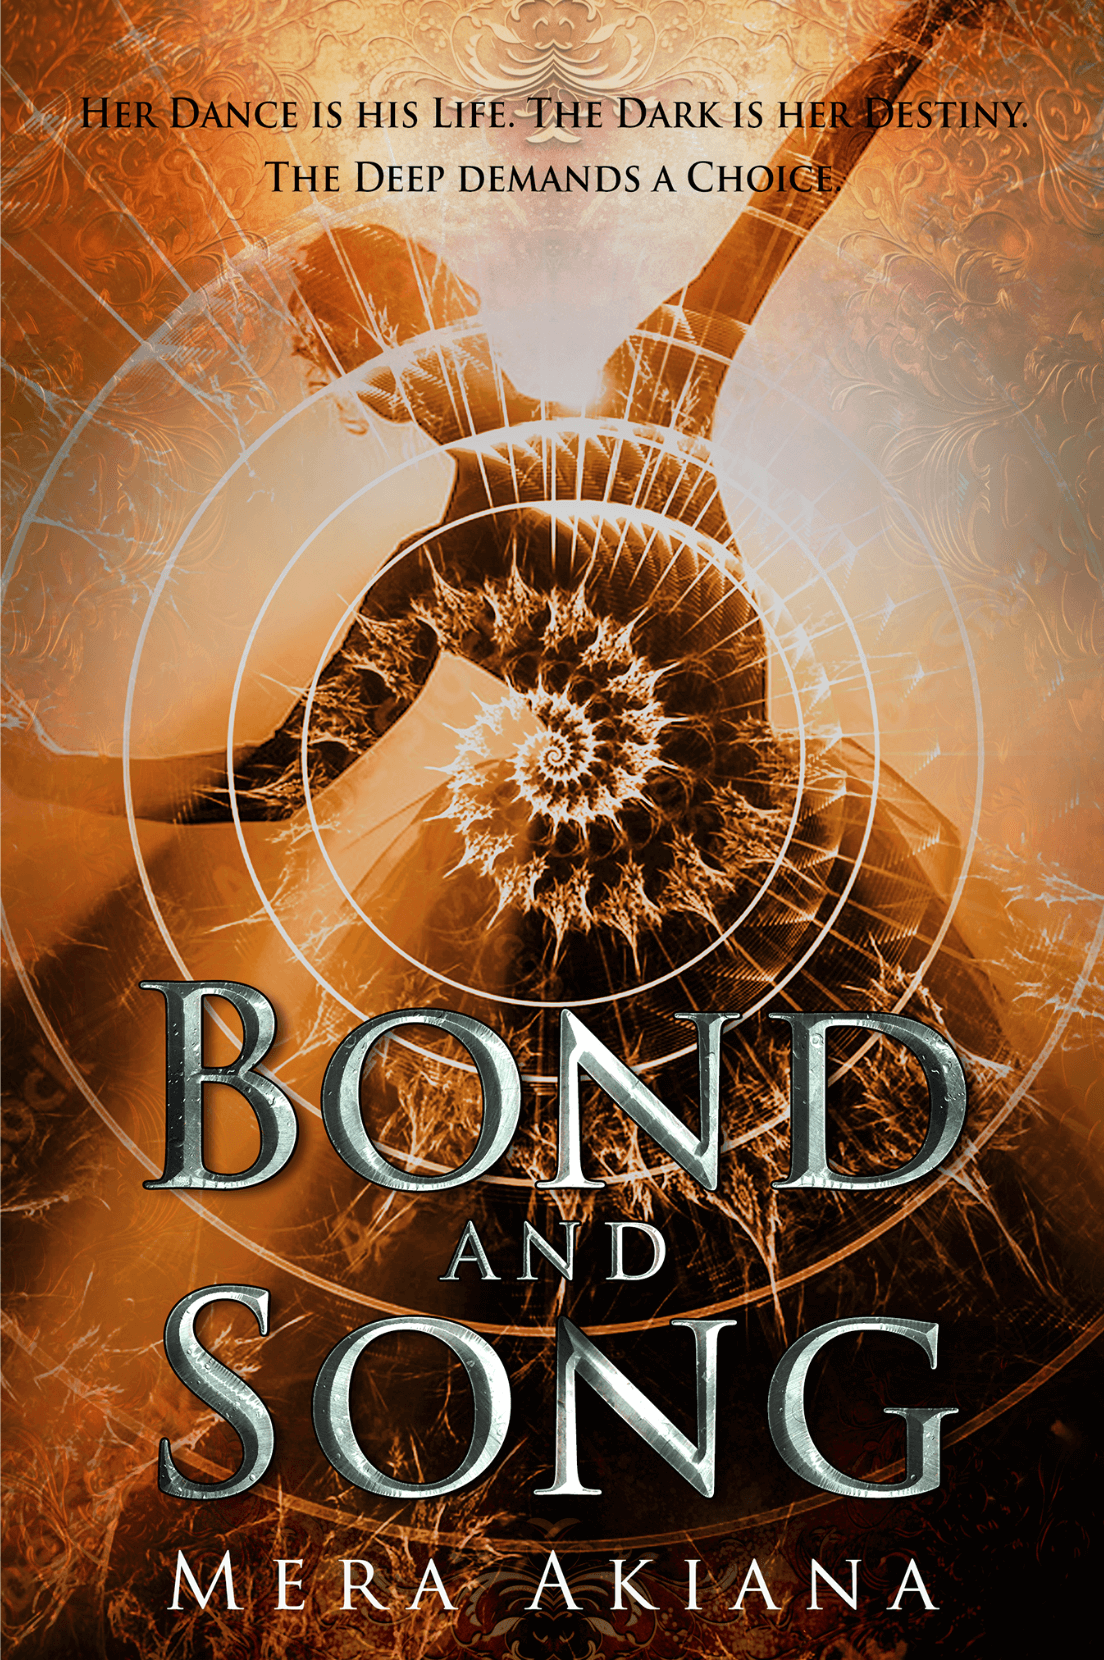 Draft-in-progress of cover design for Bond and Song